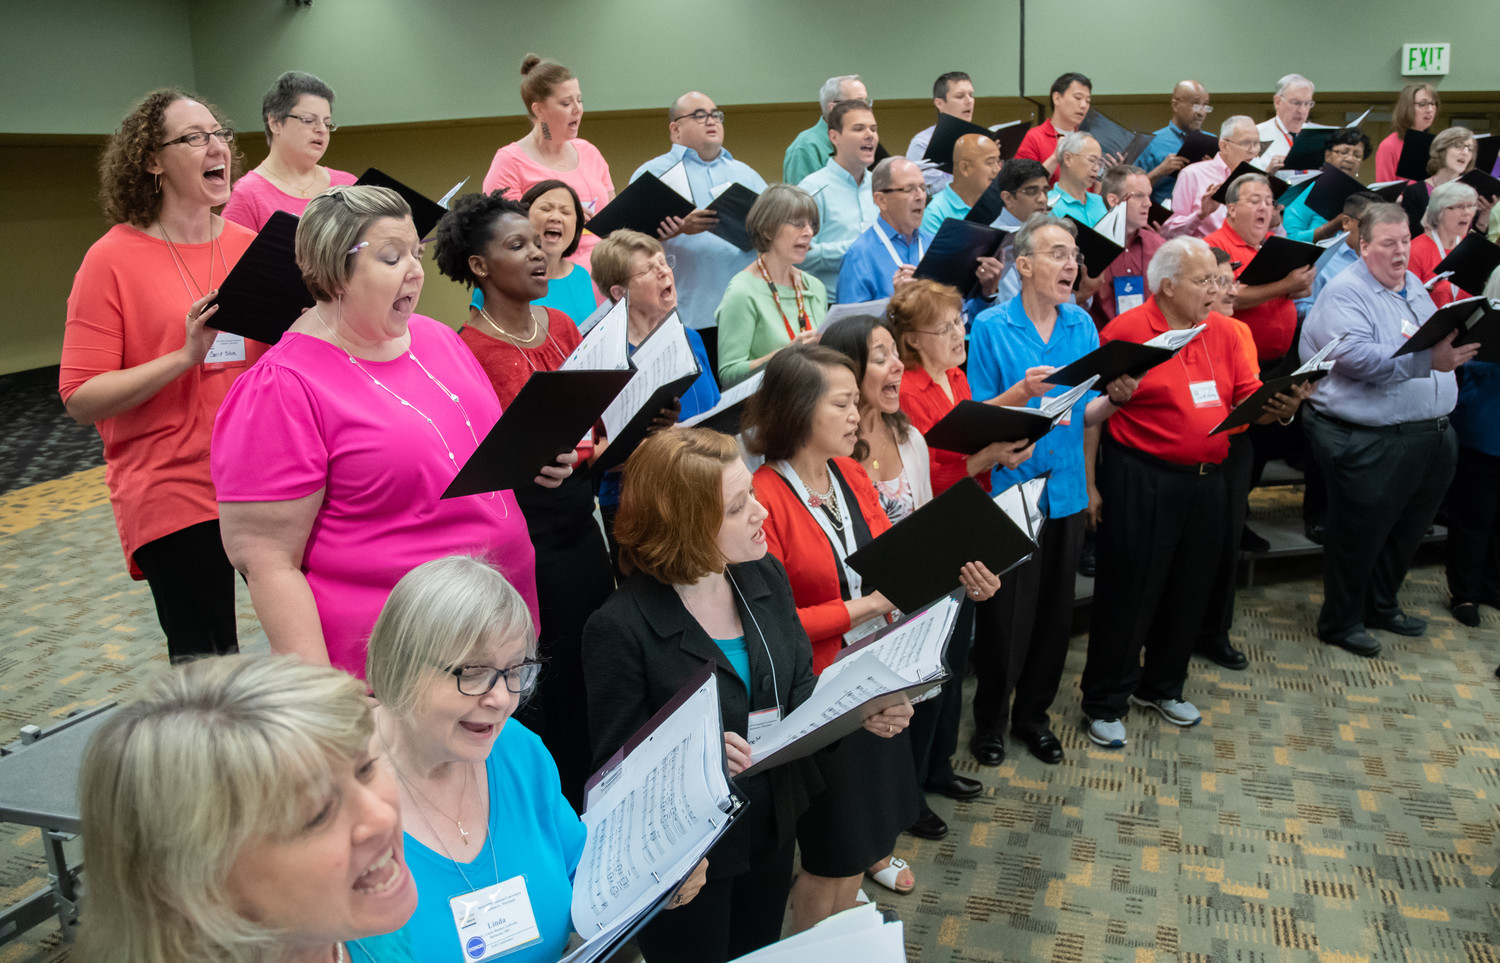 A combined choir from the Baltimore and Washington archdioceses rehearse July 12 prior to a concert at the National Association of Pastoral Musicians convention at the Baltimore Convention Center.